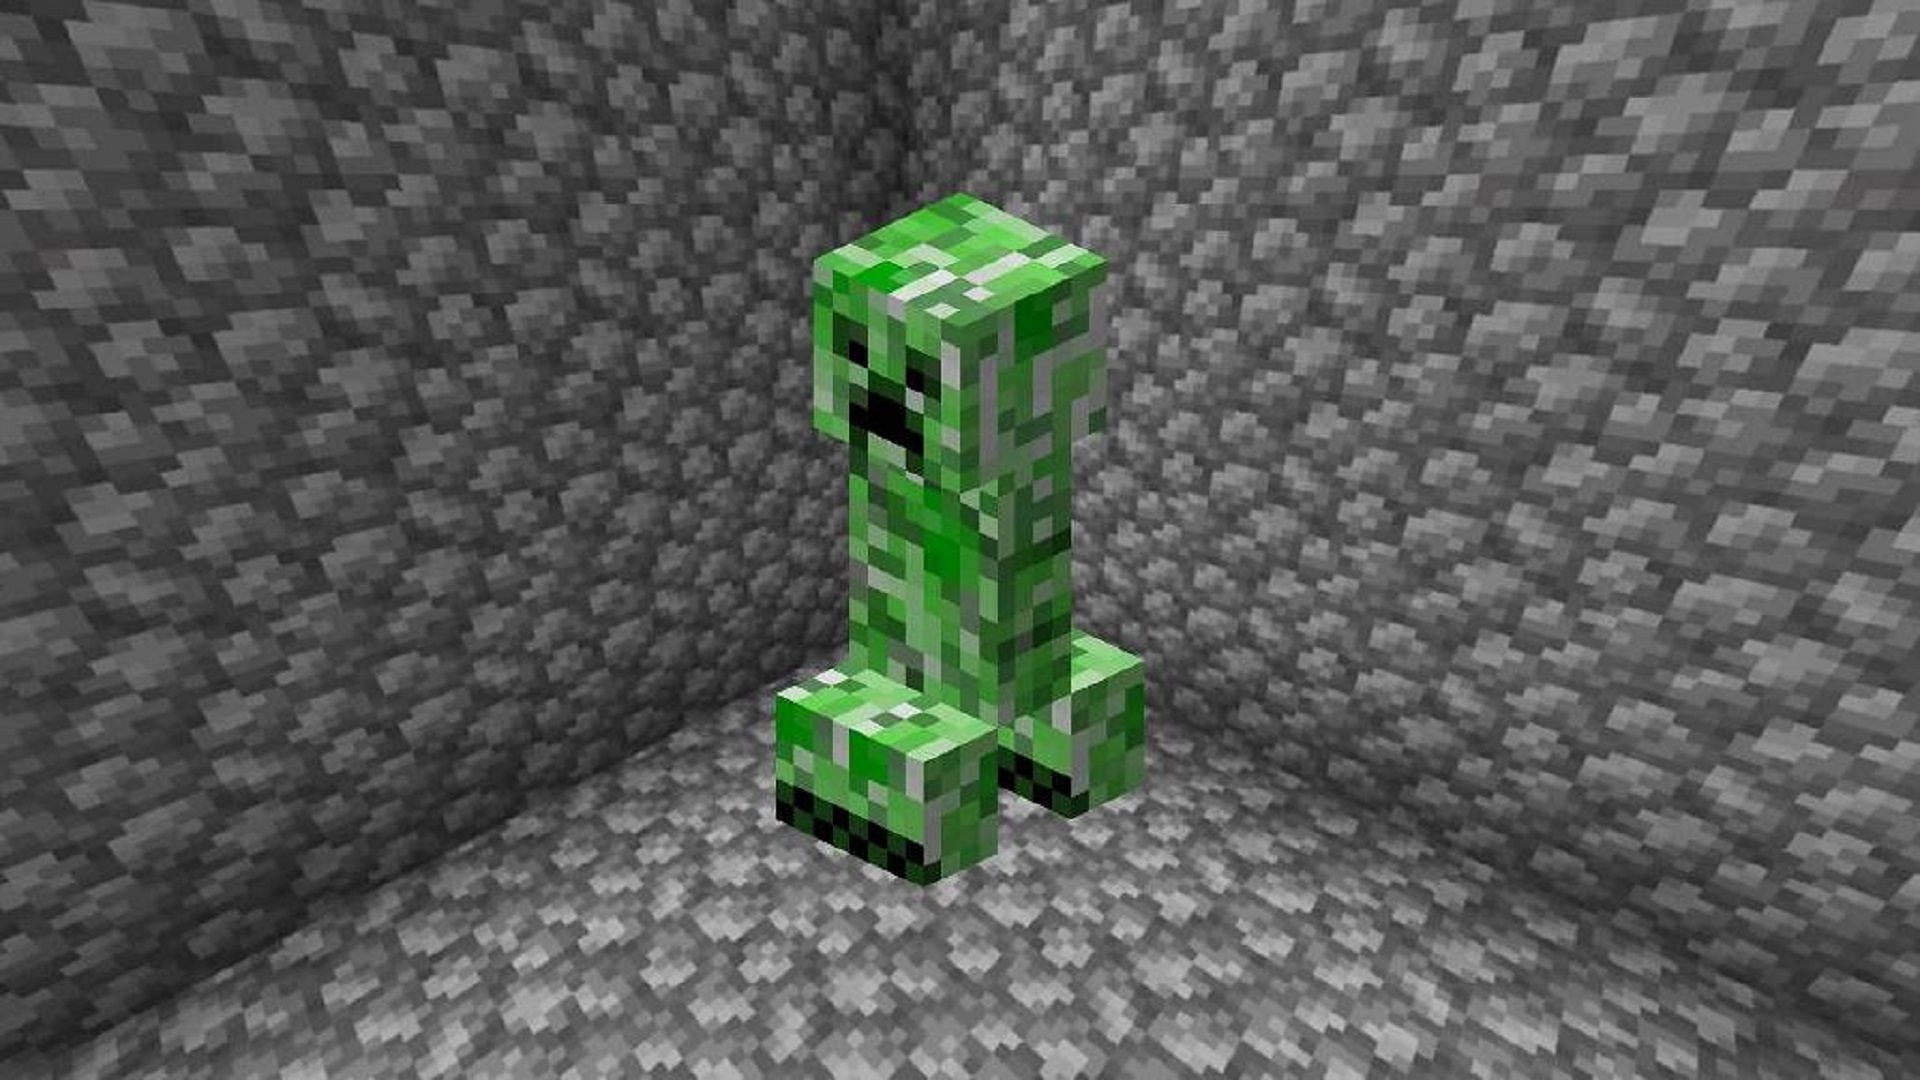 Creeper farm designs have changed over the years (Image via Mojang)